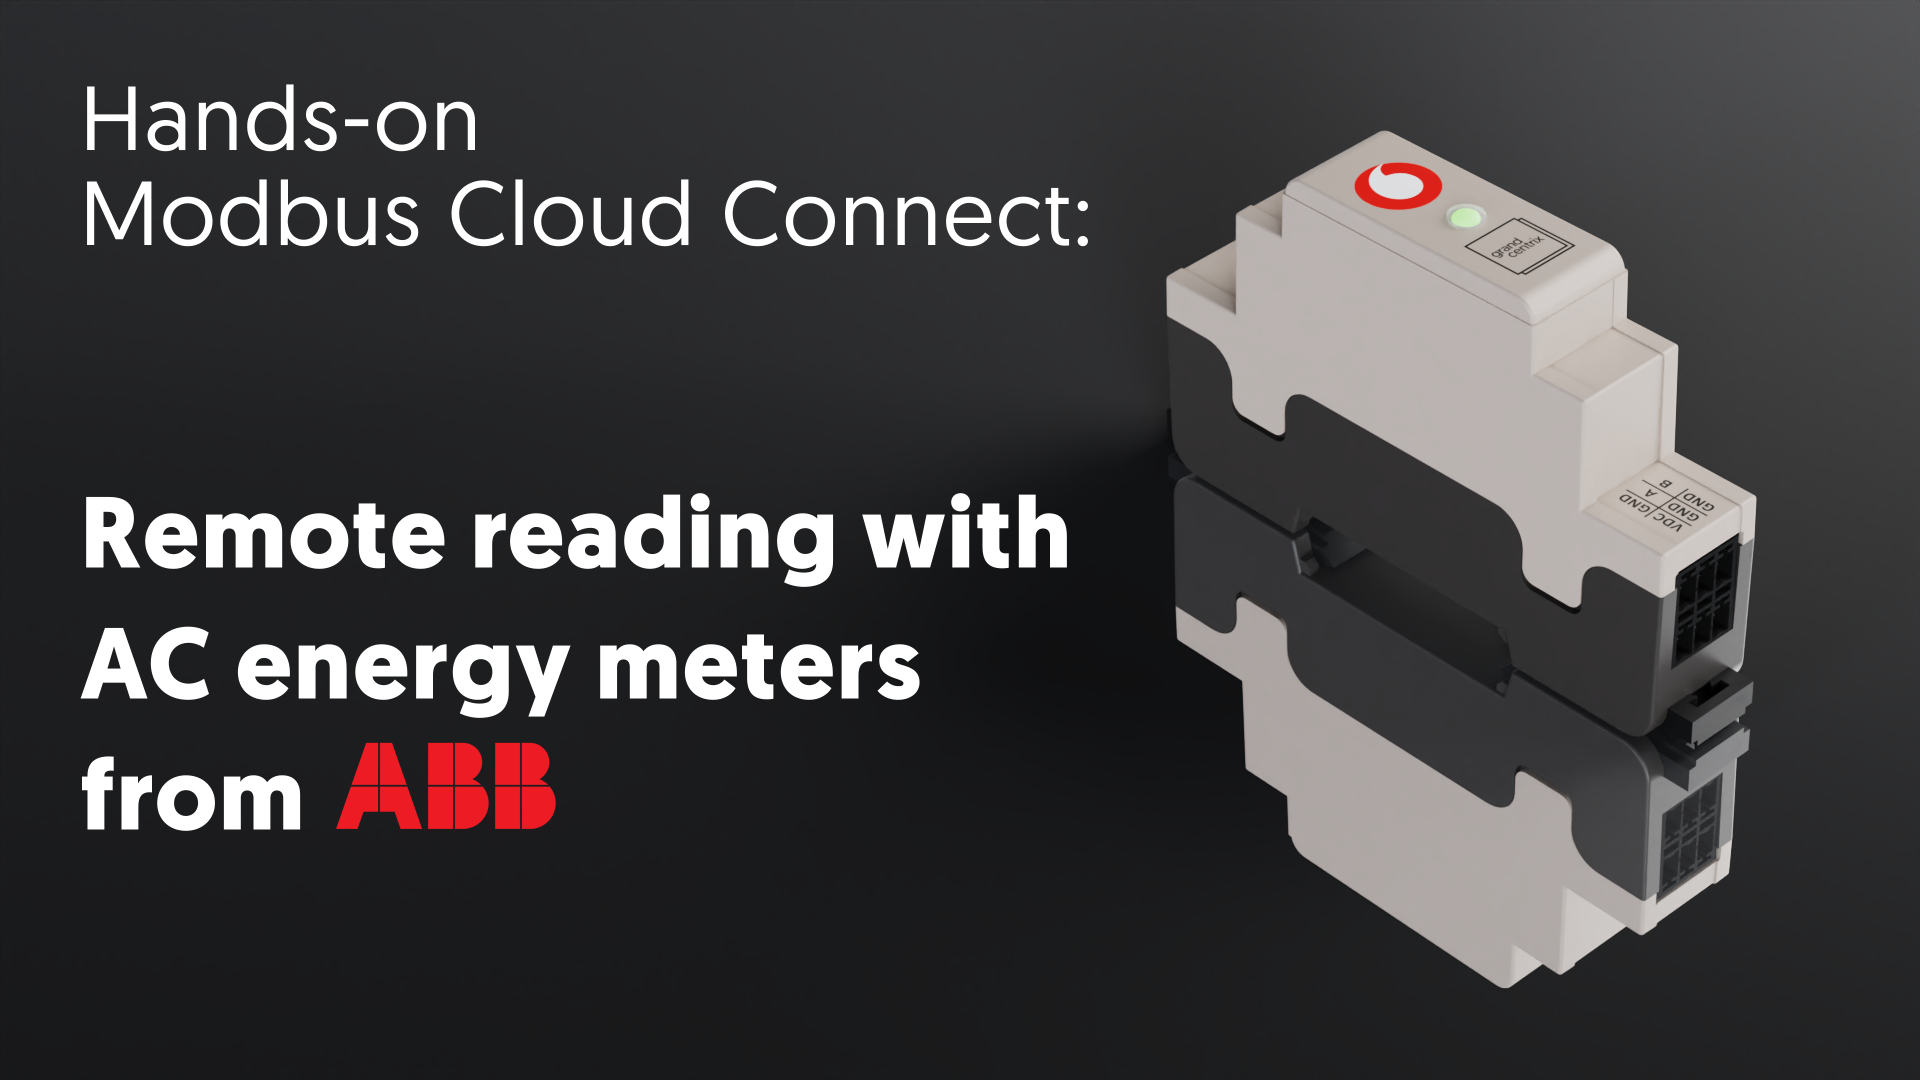 Hands-on Modbus Cloud Connect - Remote reading with AC energy meters